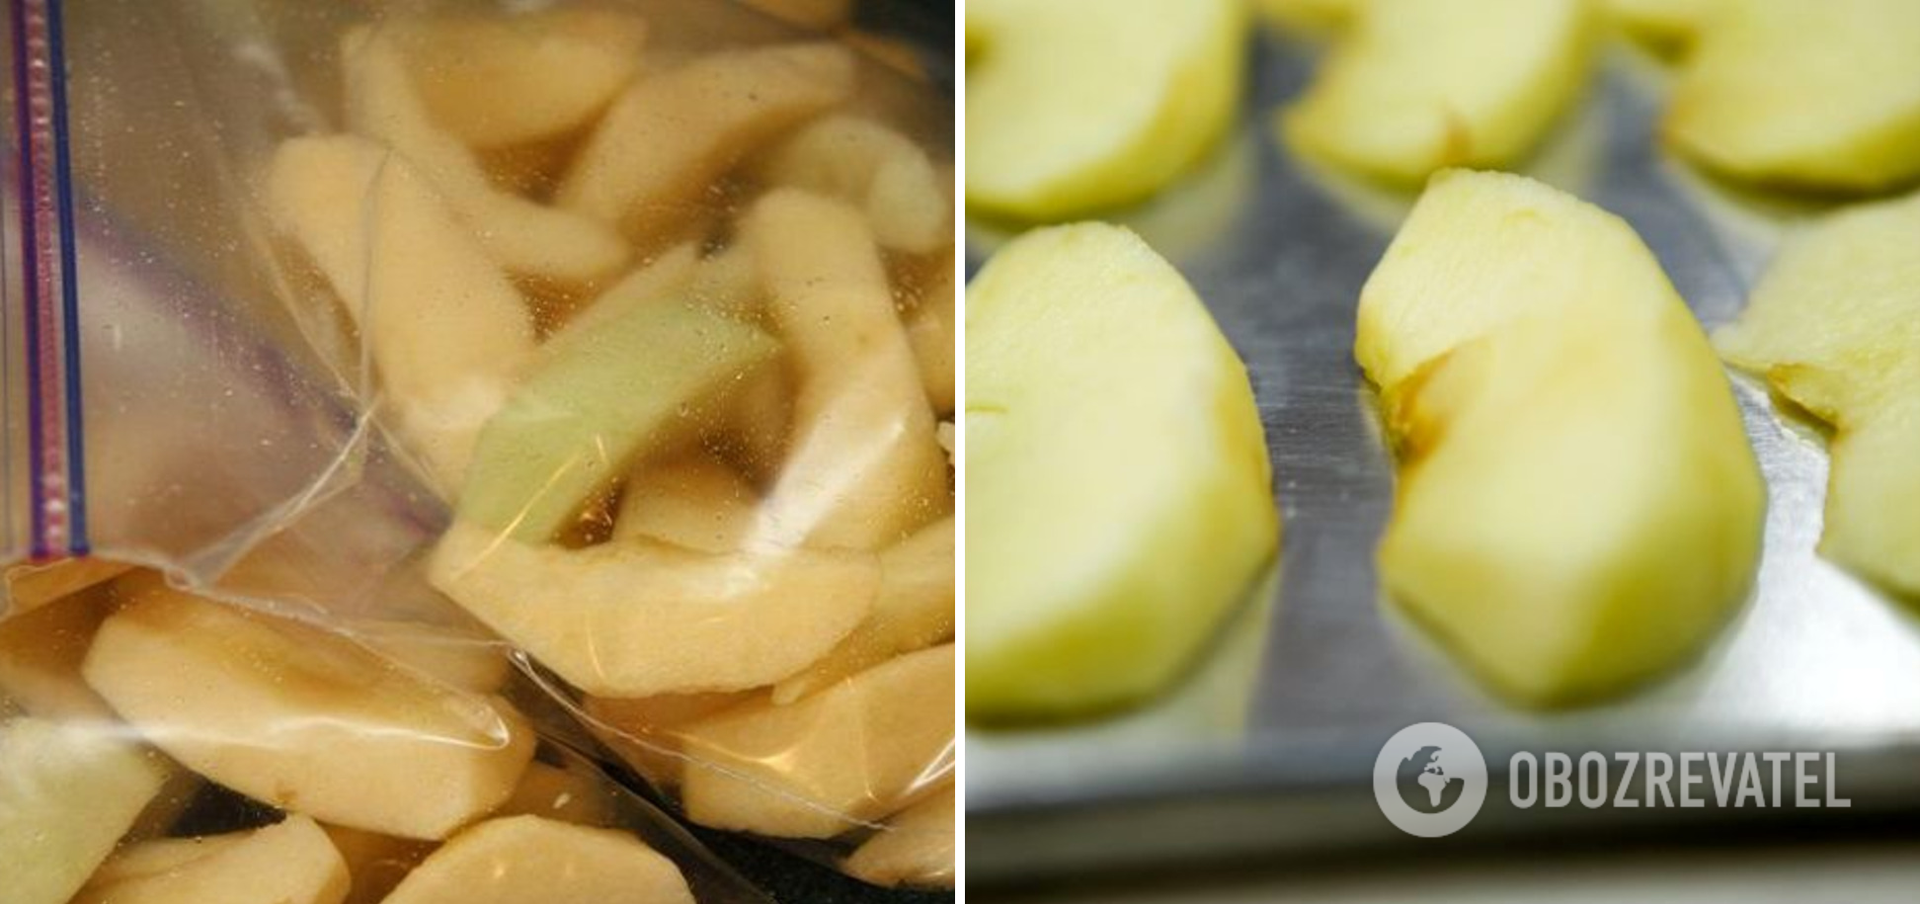 How to Freeze Apples